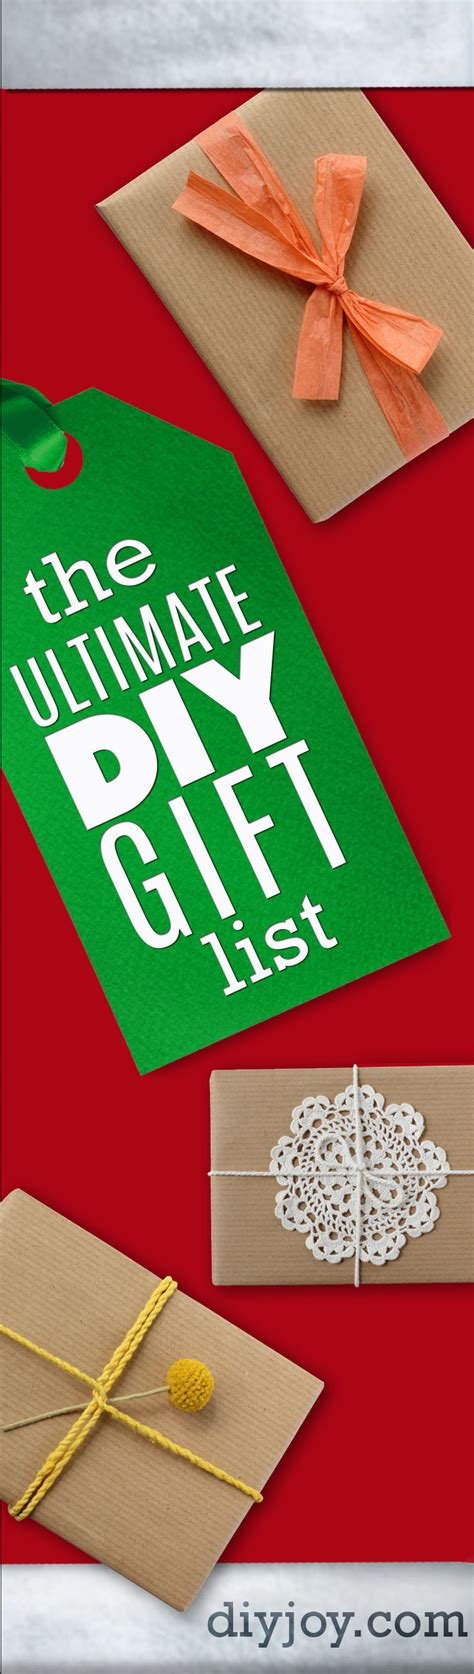 78 gifts for men that they'll actually use (and love so much). The Ultimate DIY Christmas Gifts list